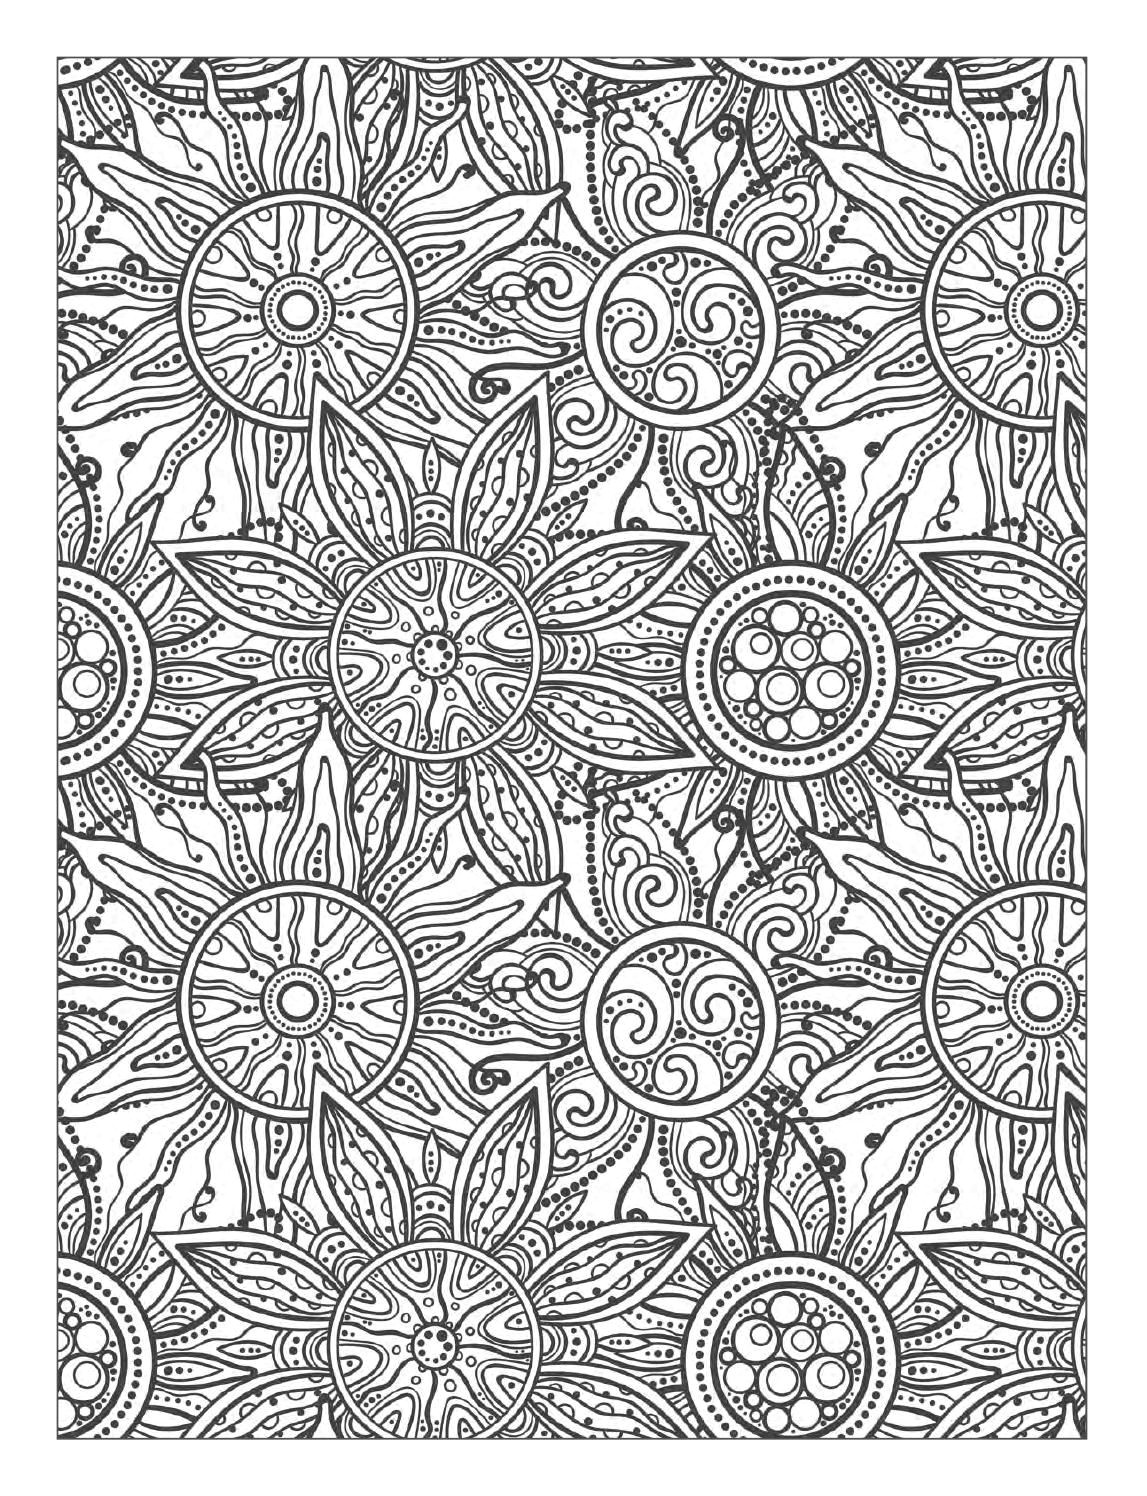 Beautiful Flowers Detailed Floral Designs Coloring Book preview by Alexandru Ciobanu issuu